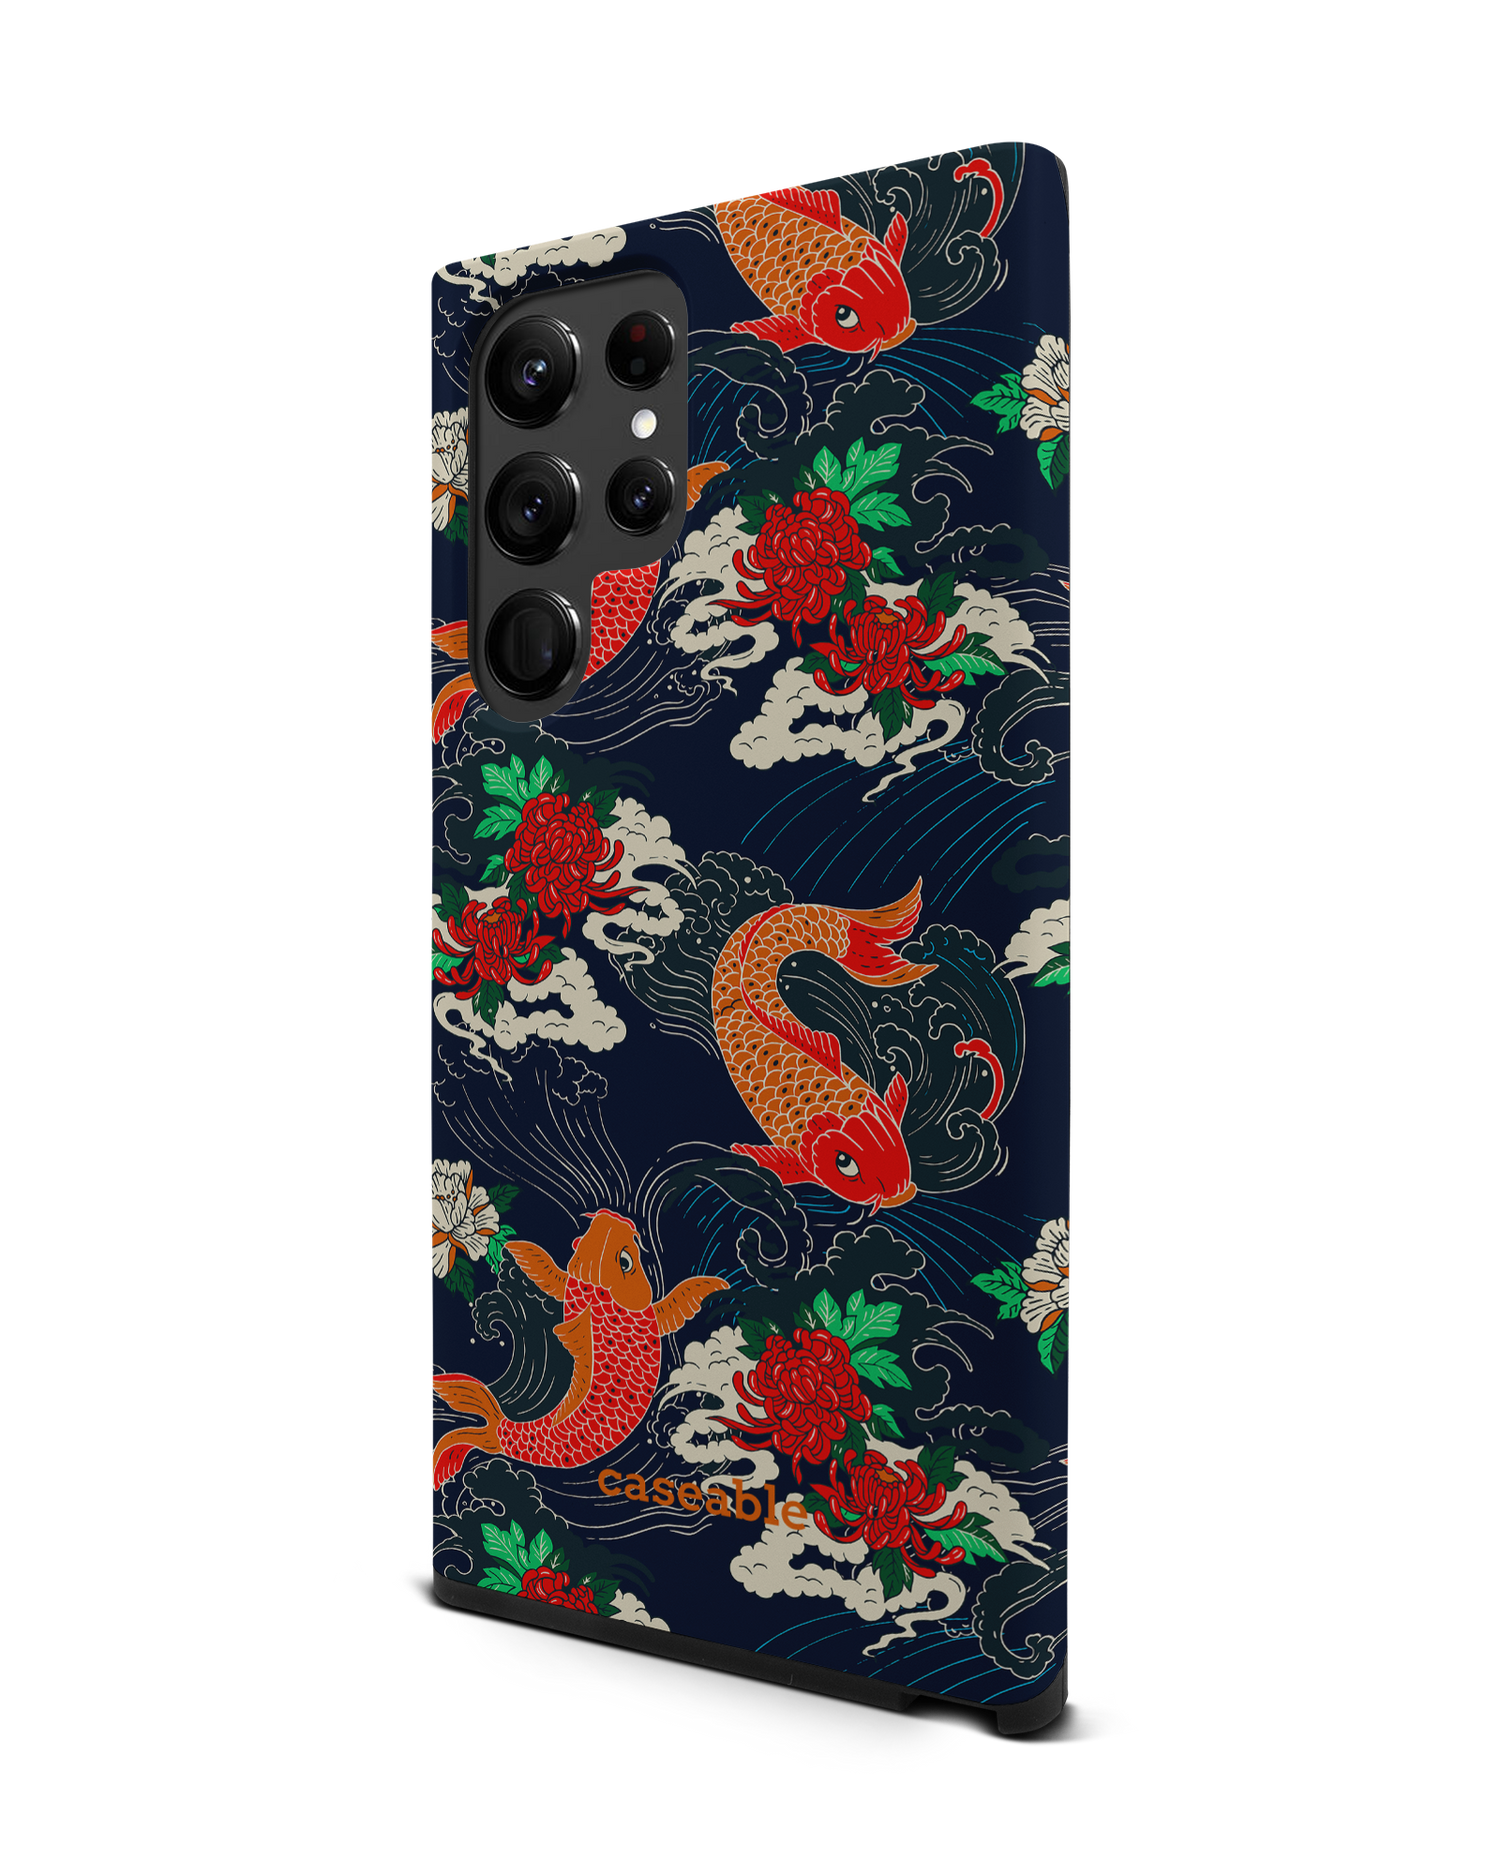 Repeating Koi Premium Phone Case Samsung Galaxy S22 Ultra 5G: View from the right side